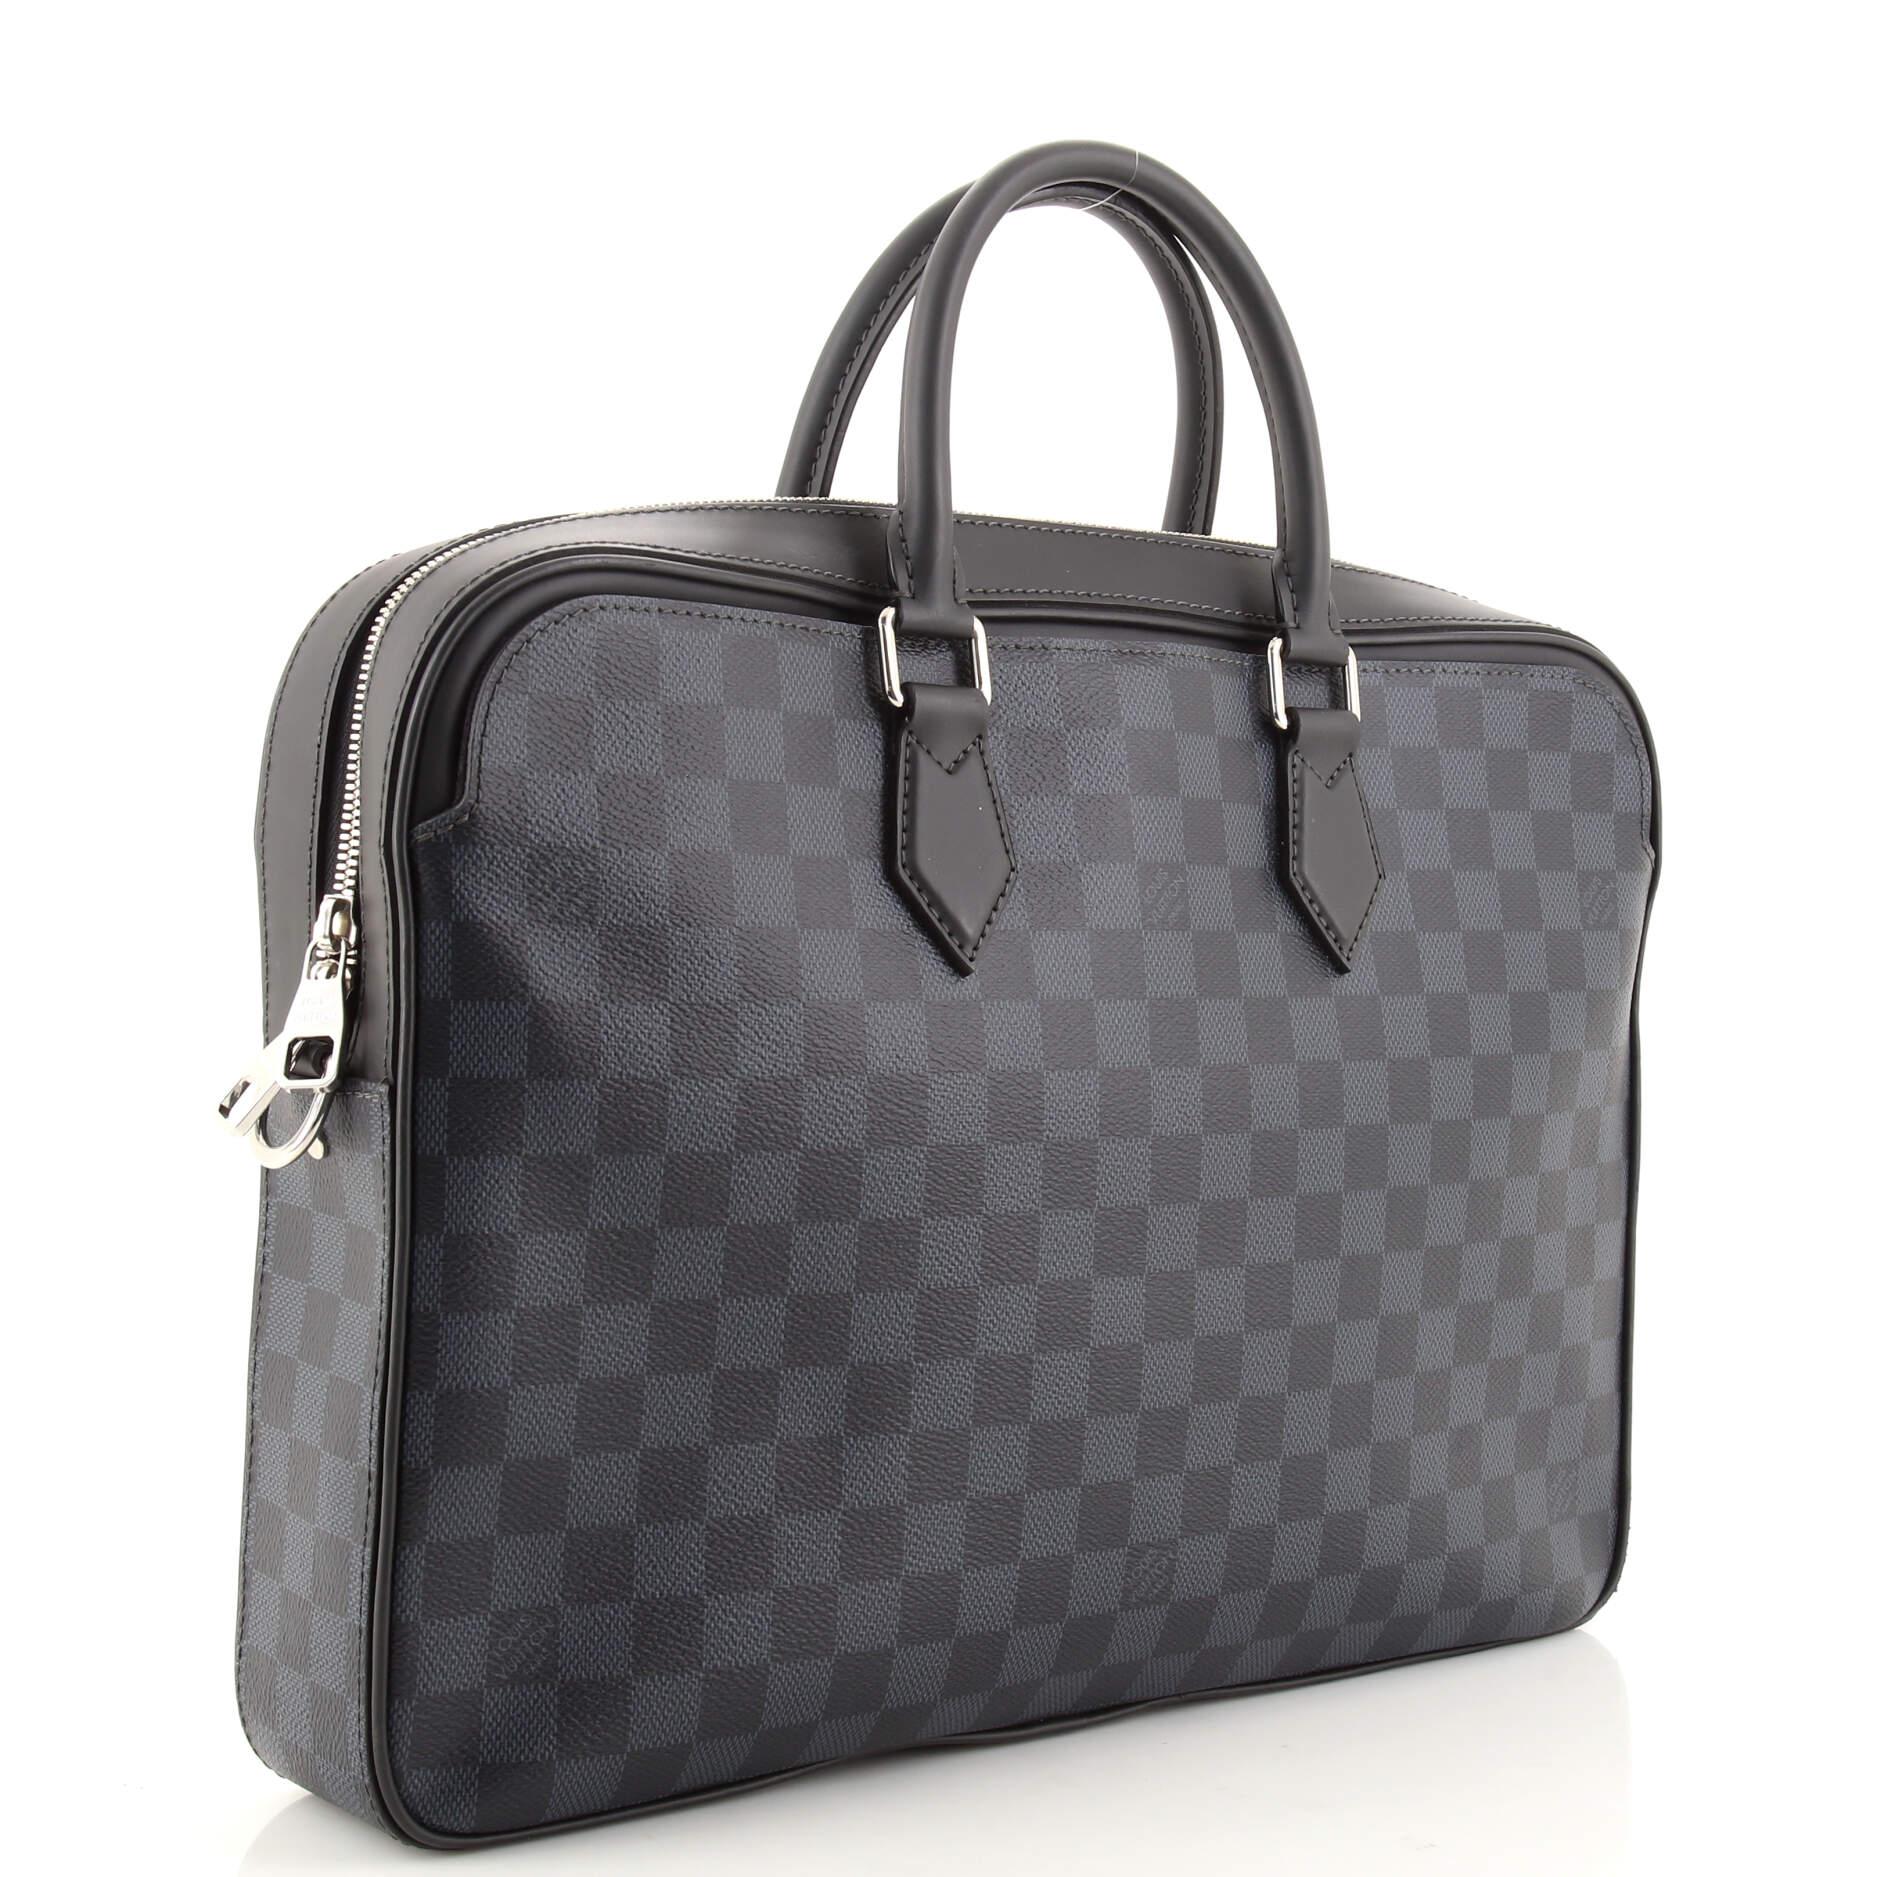 Louis Vuitton Dandy Briefcase - For Sale on 1stDibs